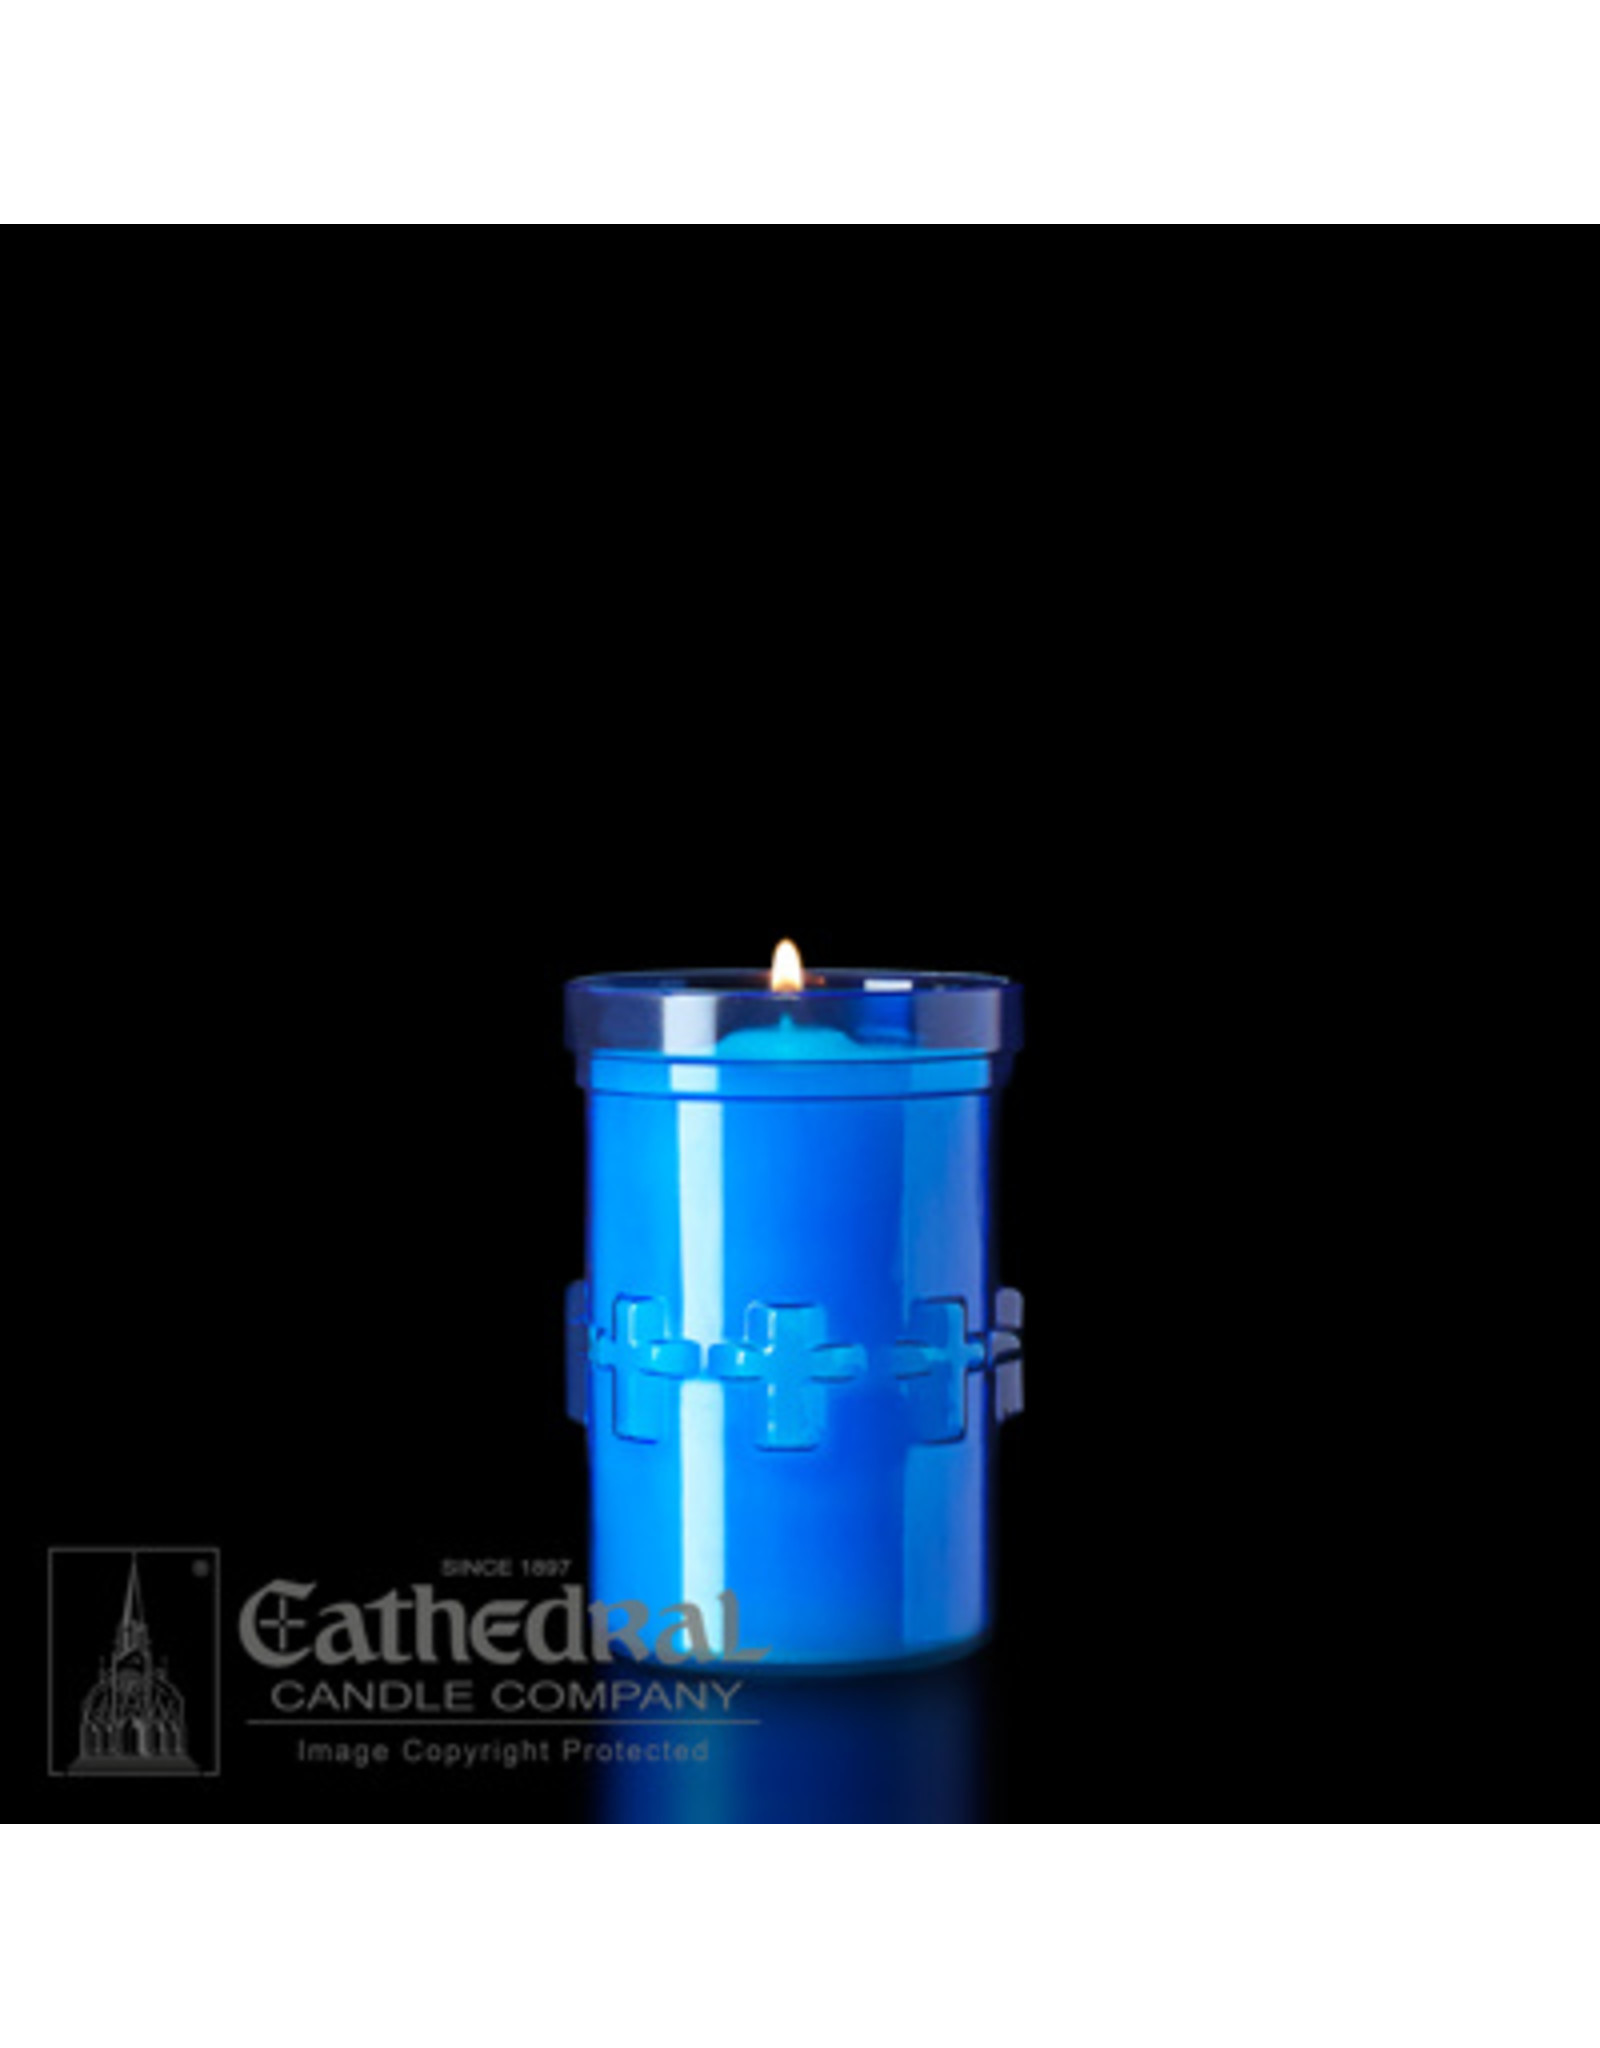 Cathedral Candle 3-Day Devotiona-Lite Blue Plastic Candles (48)